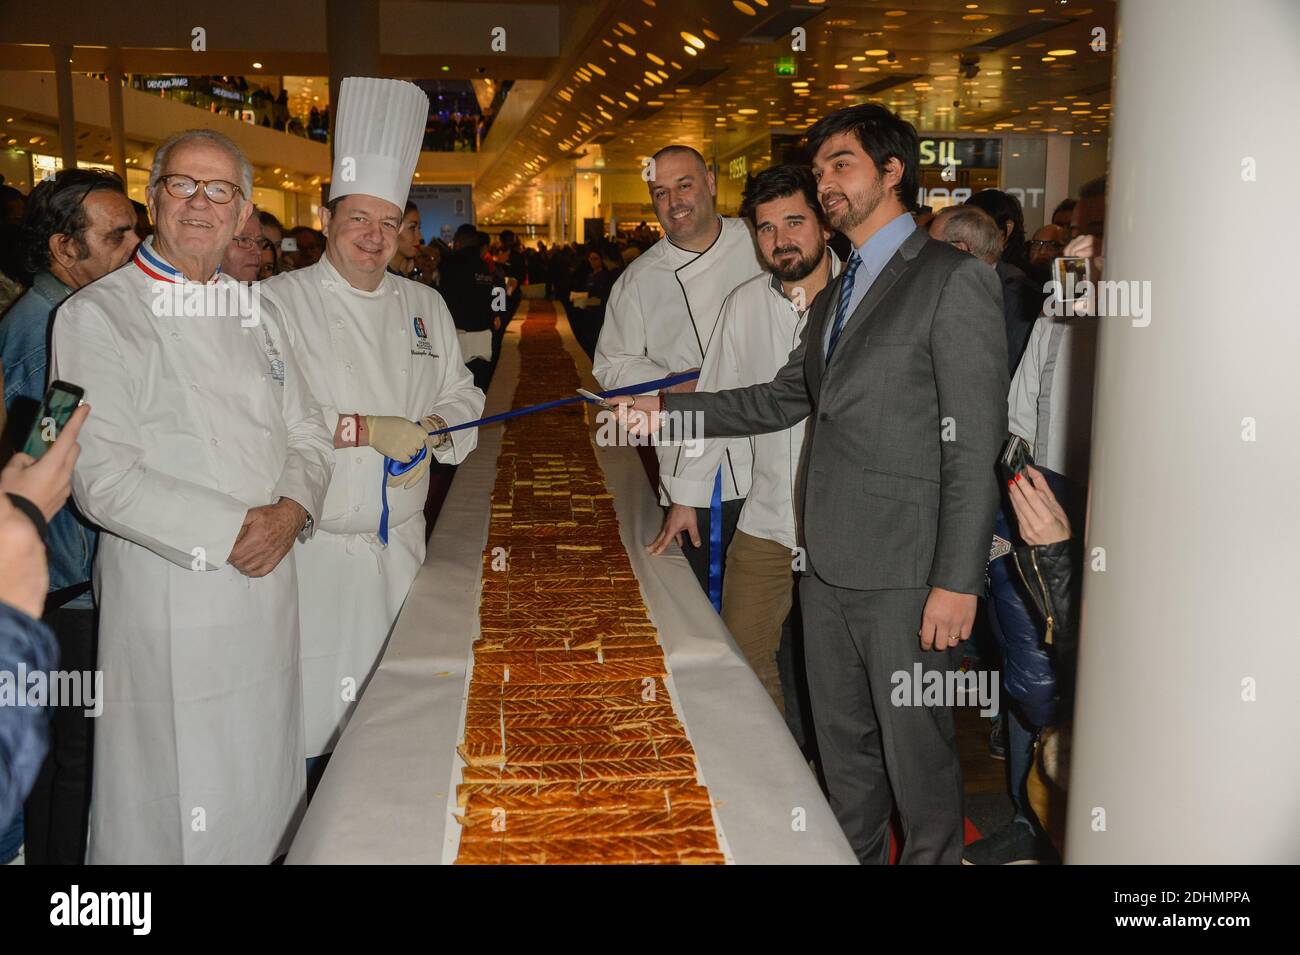 French chefs Jean-Paul Pignol, Christophe Marguin, Philippe Bernachon and  Sebastien Bouillet pose along with mall director Jeremy Desprets during the  presentation of the world's biggest Epiphany cake at Confluence shopping  mall in